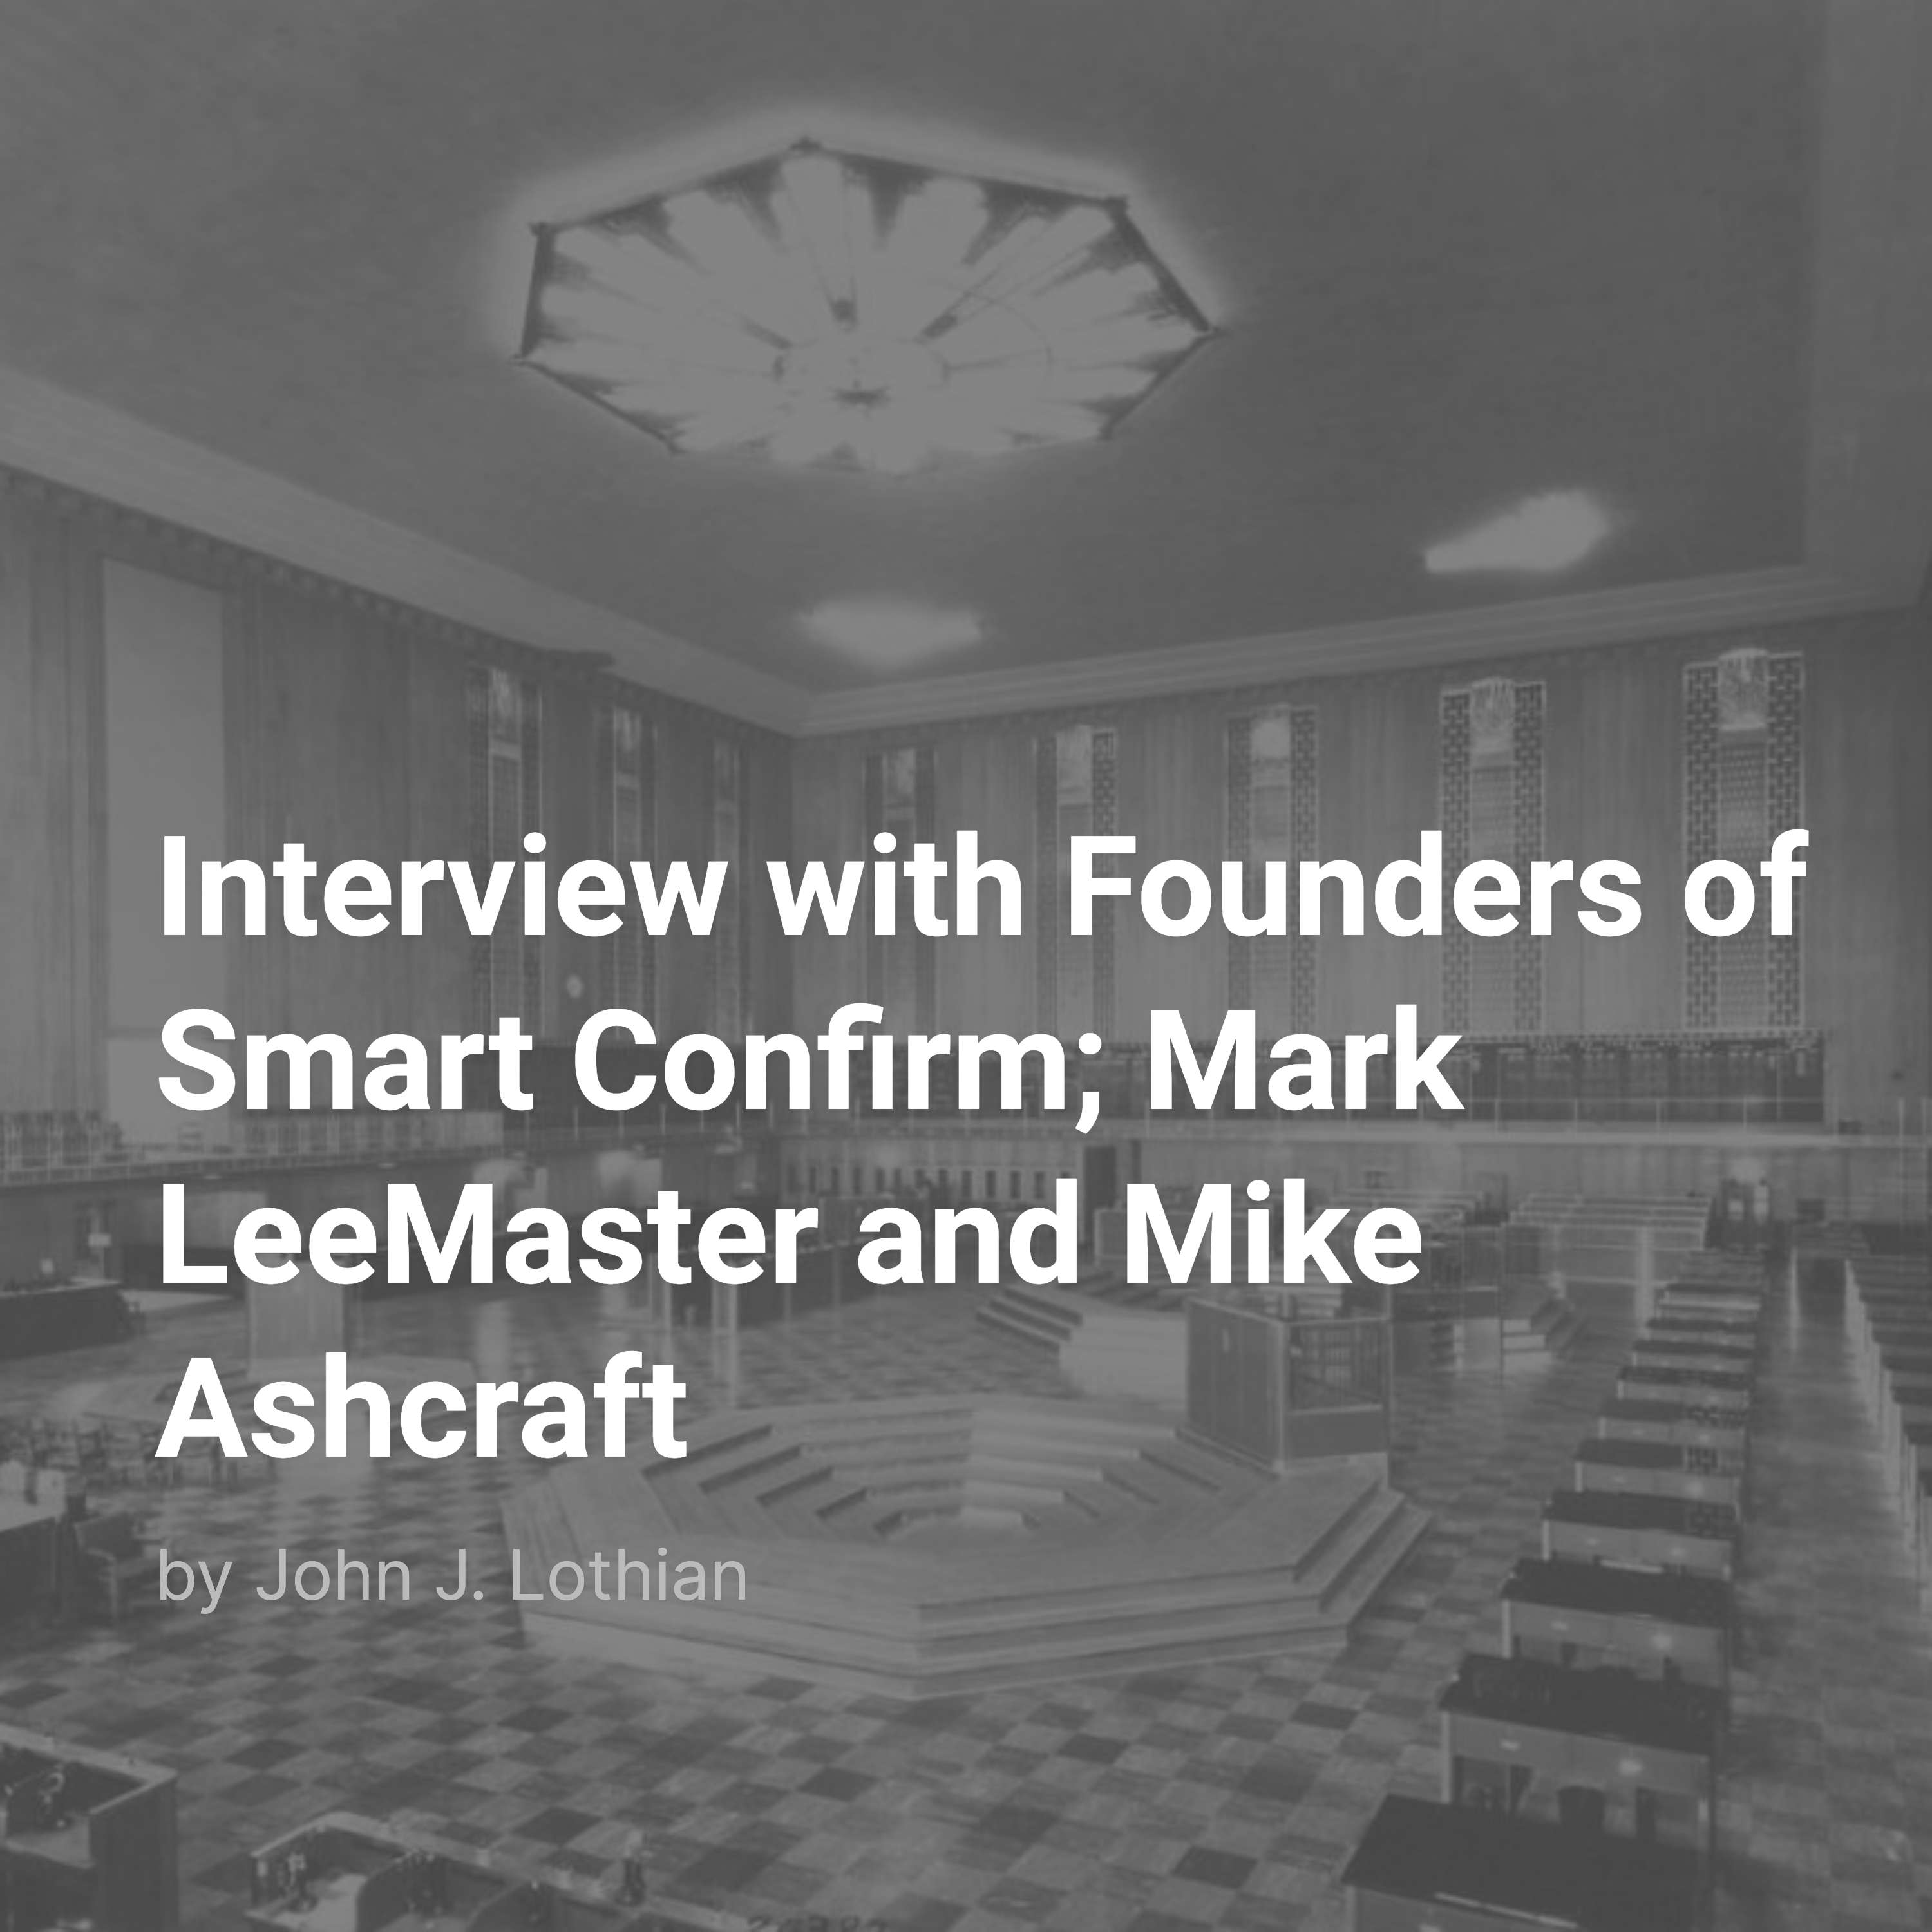 Interview with Founders of Smart Confirm; Mark LeeMaster and Mike Ashcraft